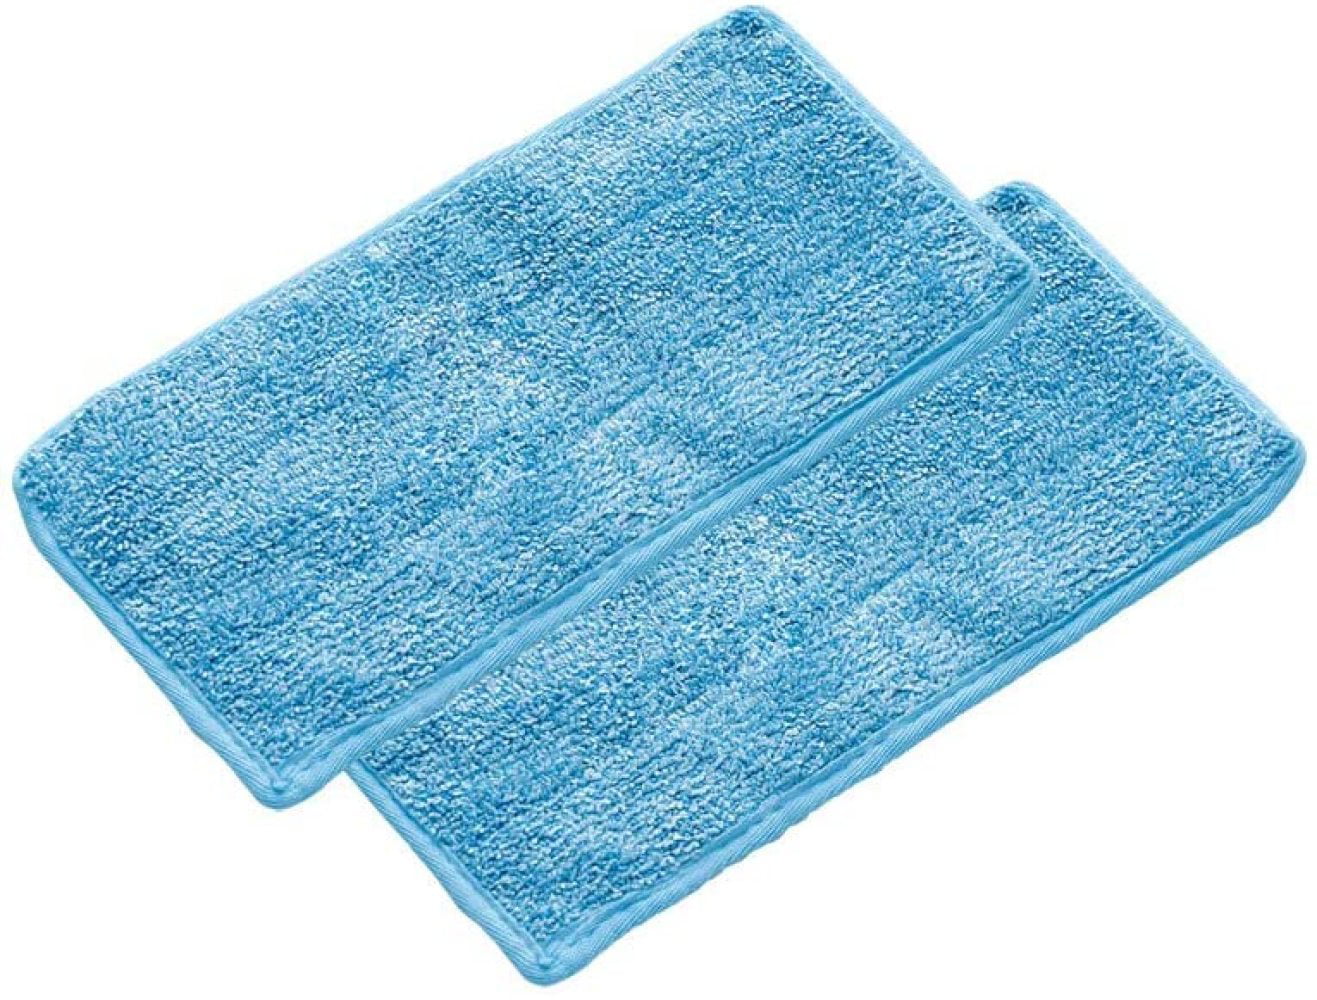 Real Clean Microfiber Refills Compatible with Swiffer and Clorox ReadyMop 6 PACK 